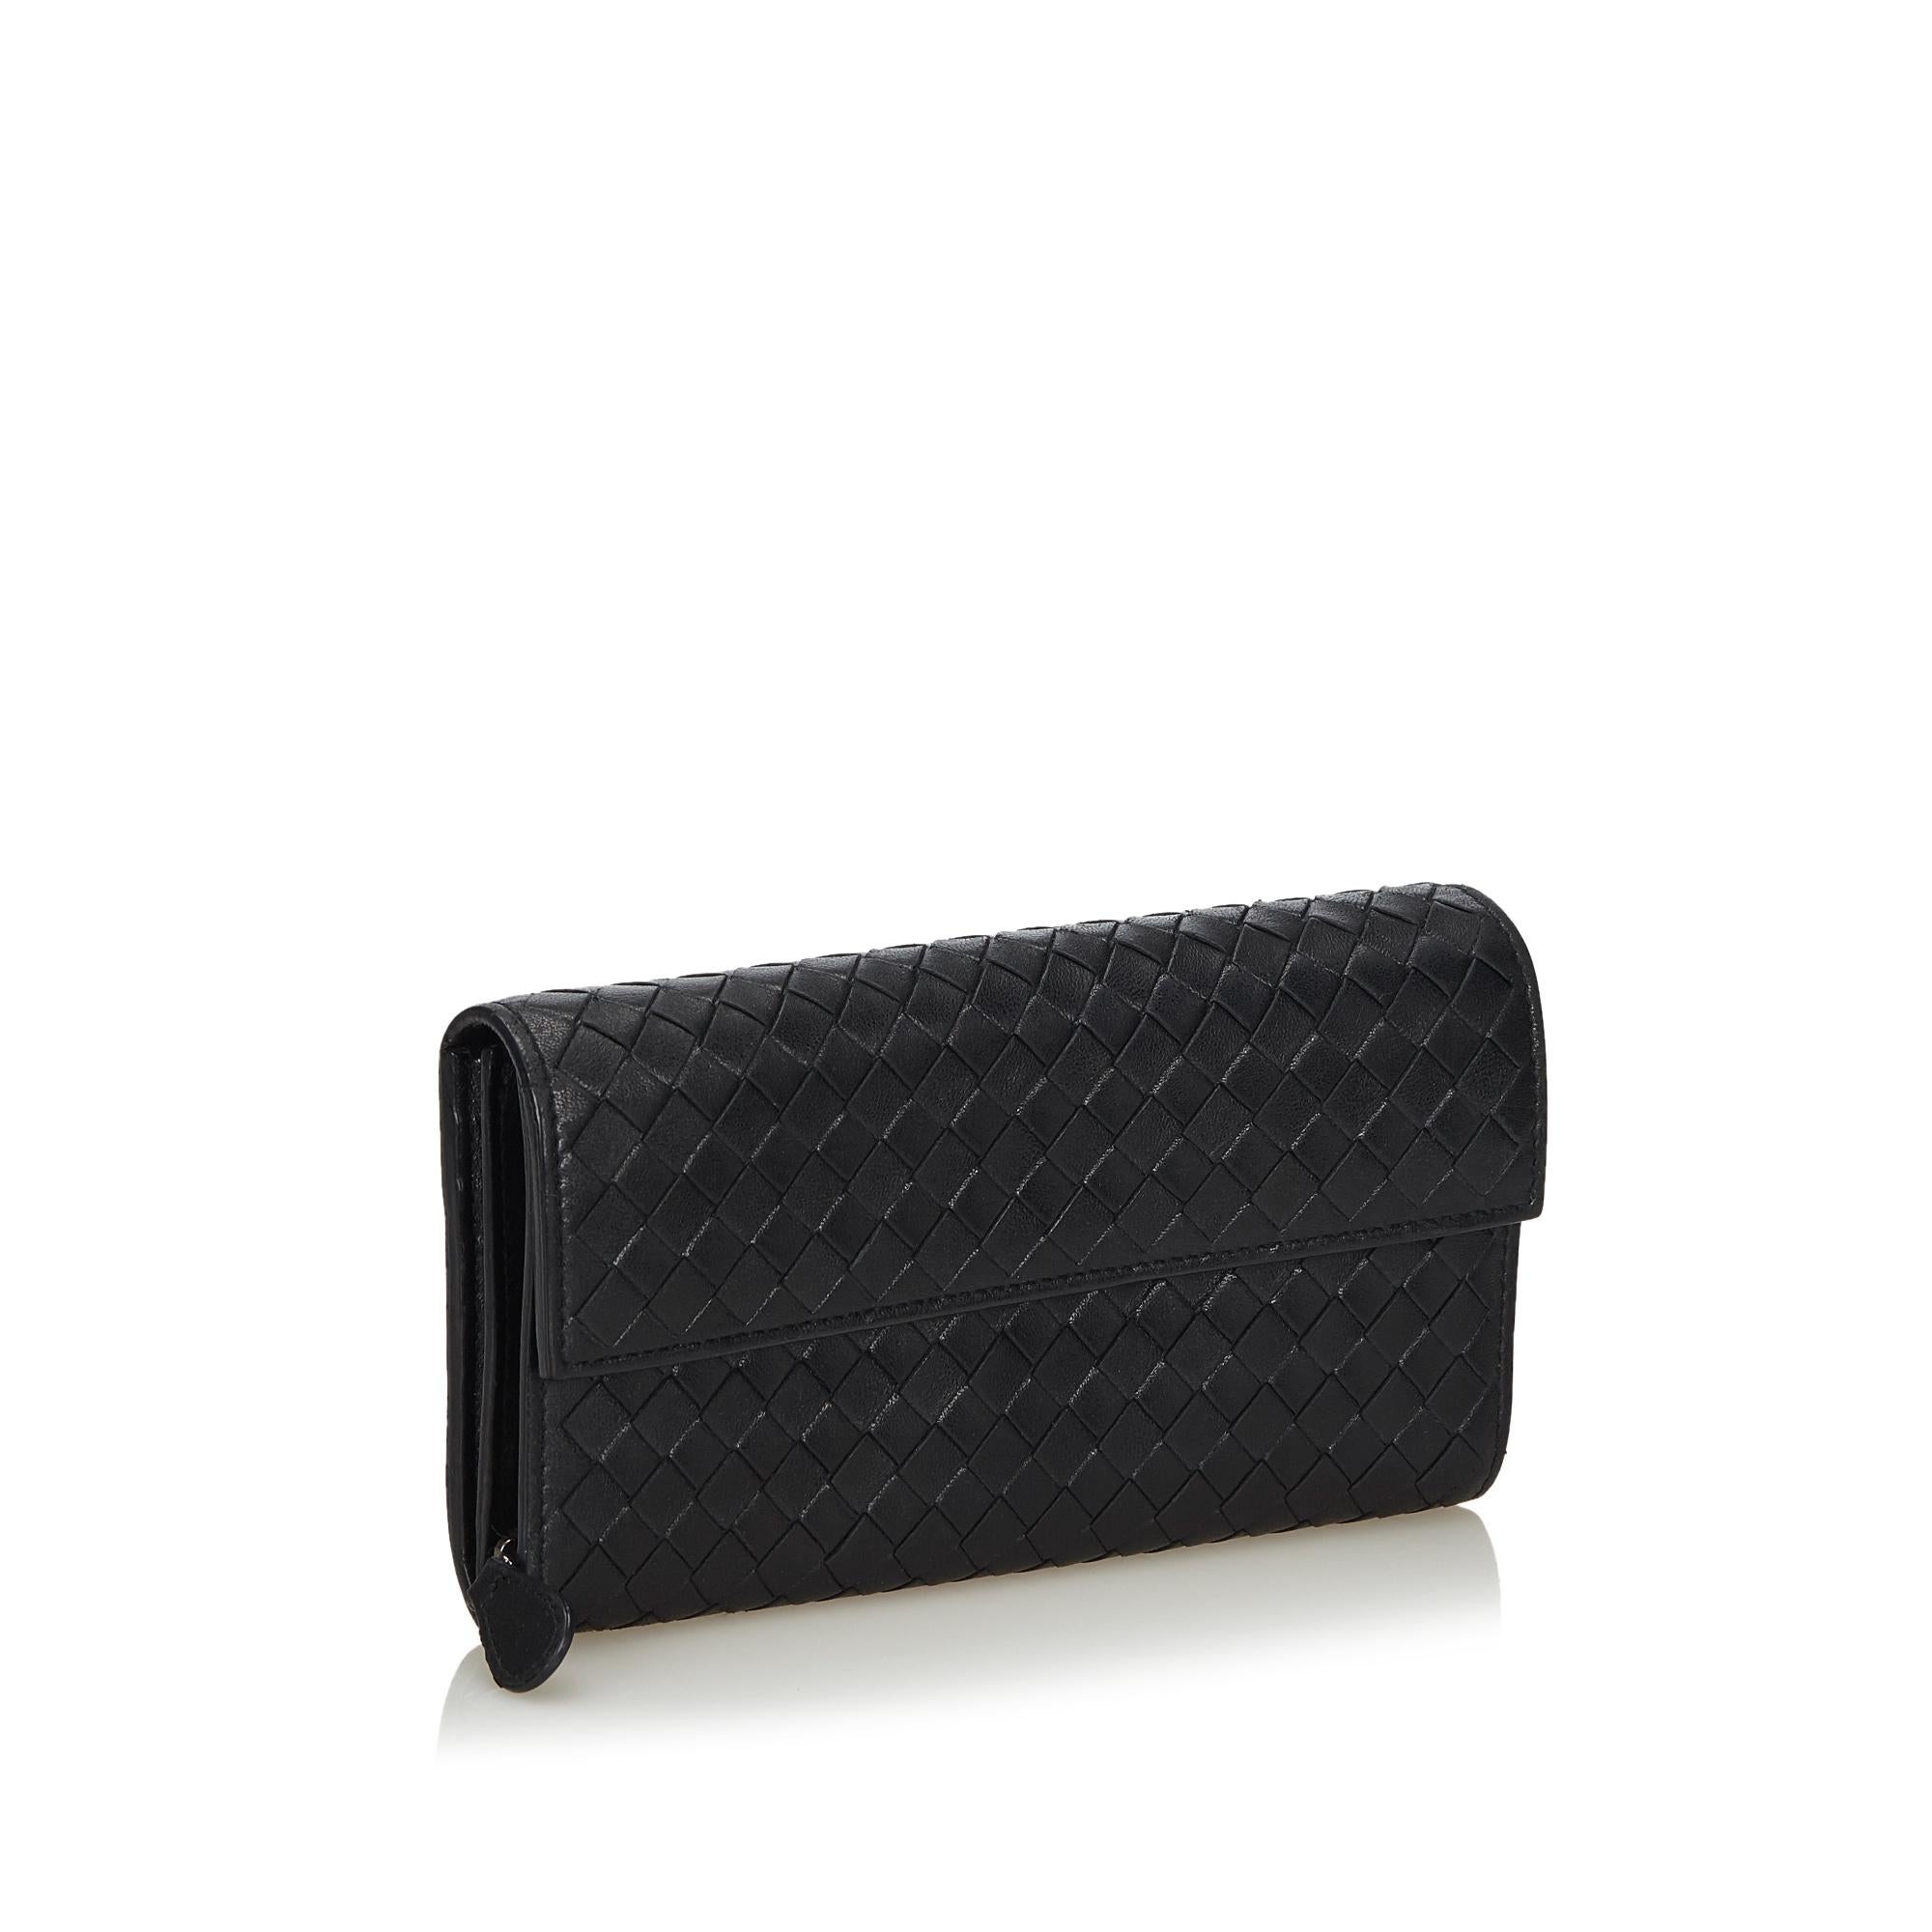 This long wallet features a weaved leather body, a front flap with a magnetic closure, and interior zip and slip pocket. It carries as B condition rating.

Inclusions: 
Dust Bag
Box

Dimensions:
Length: 11.00 cm
Width: 19.00 cm
Depth: 2.00